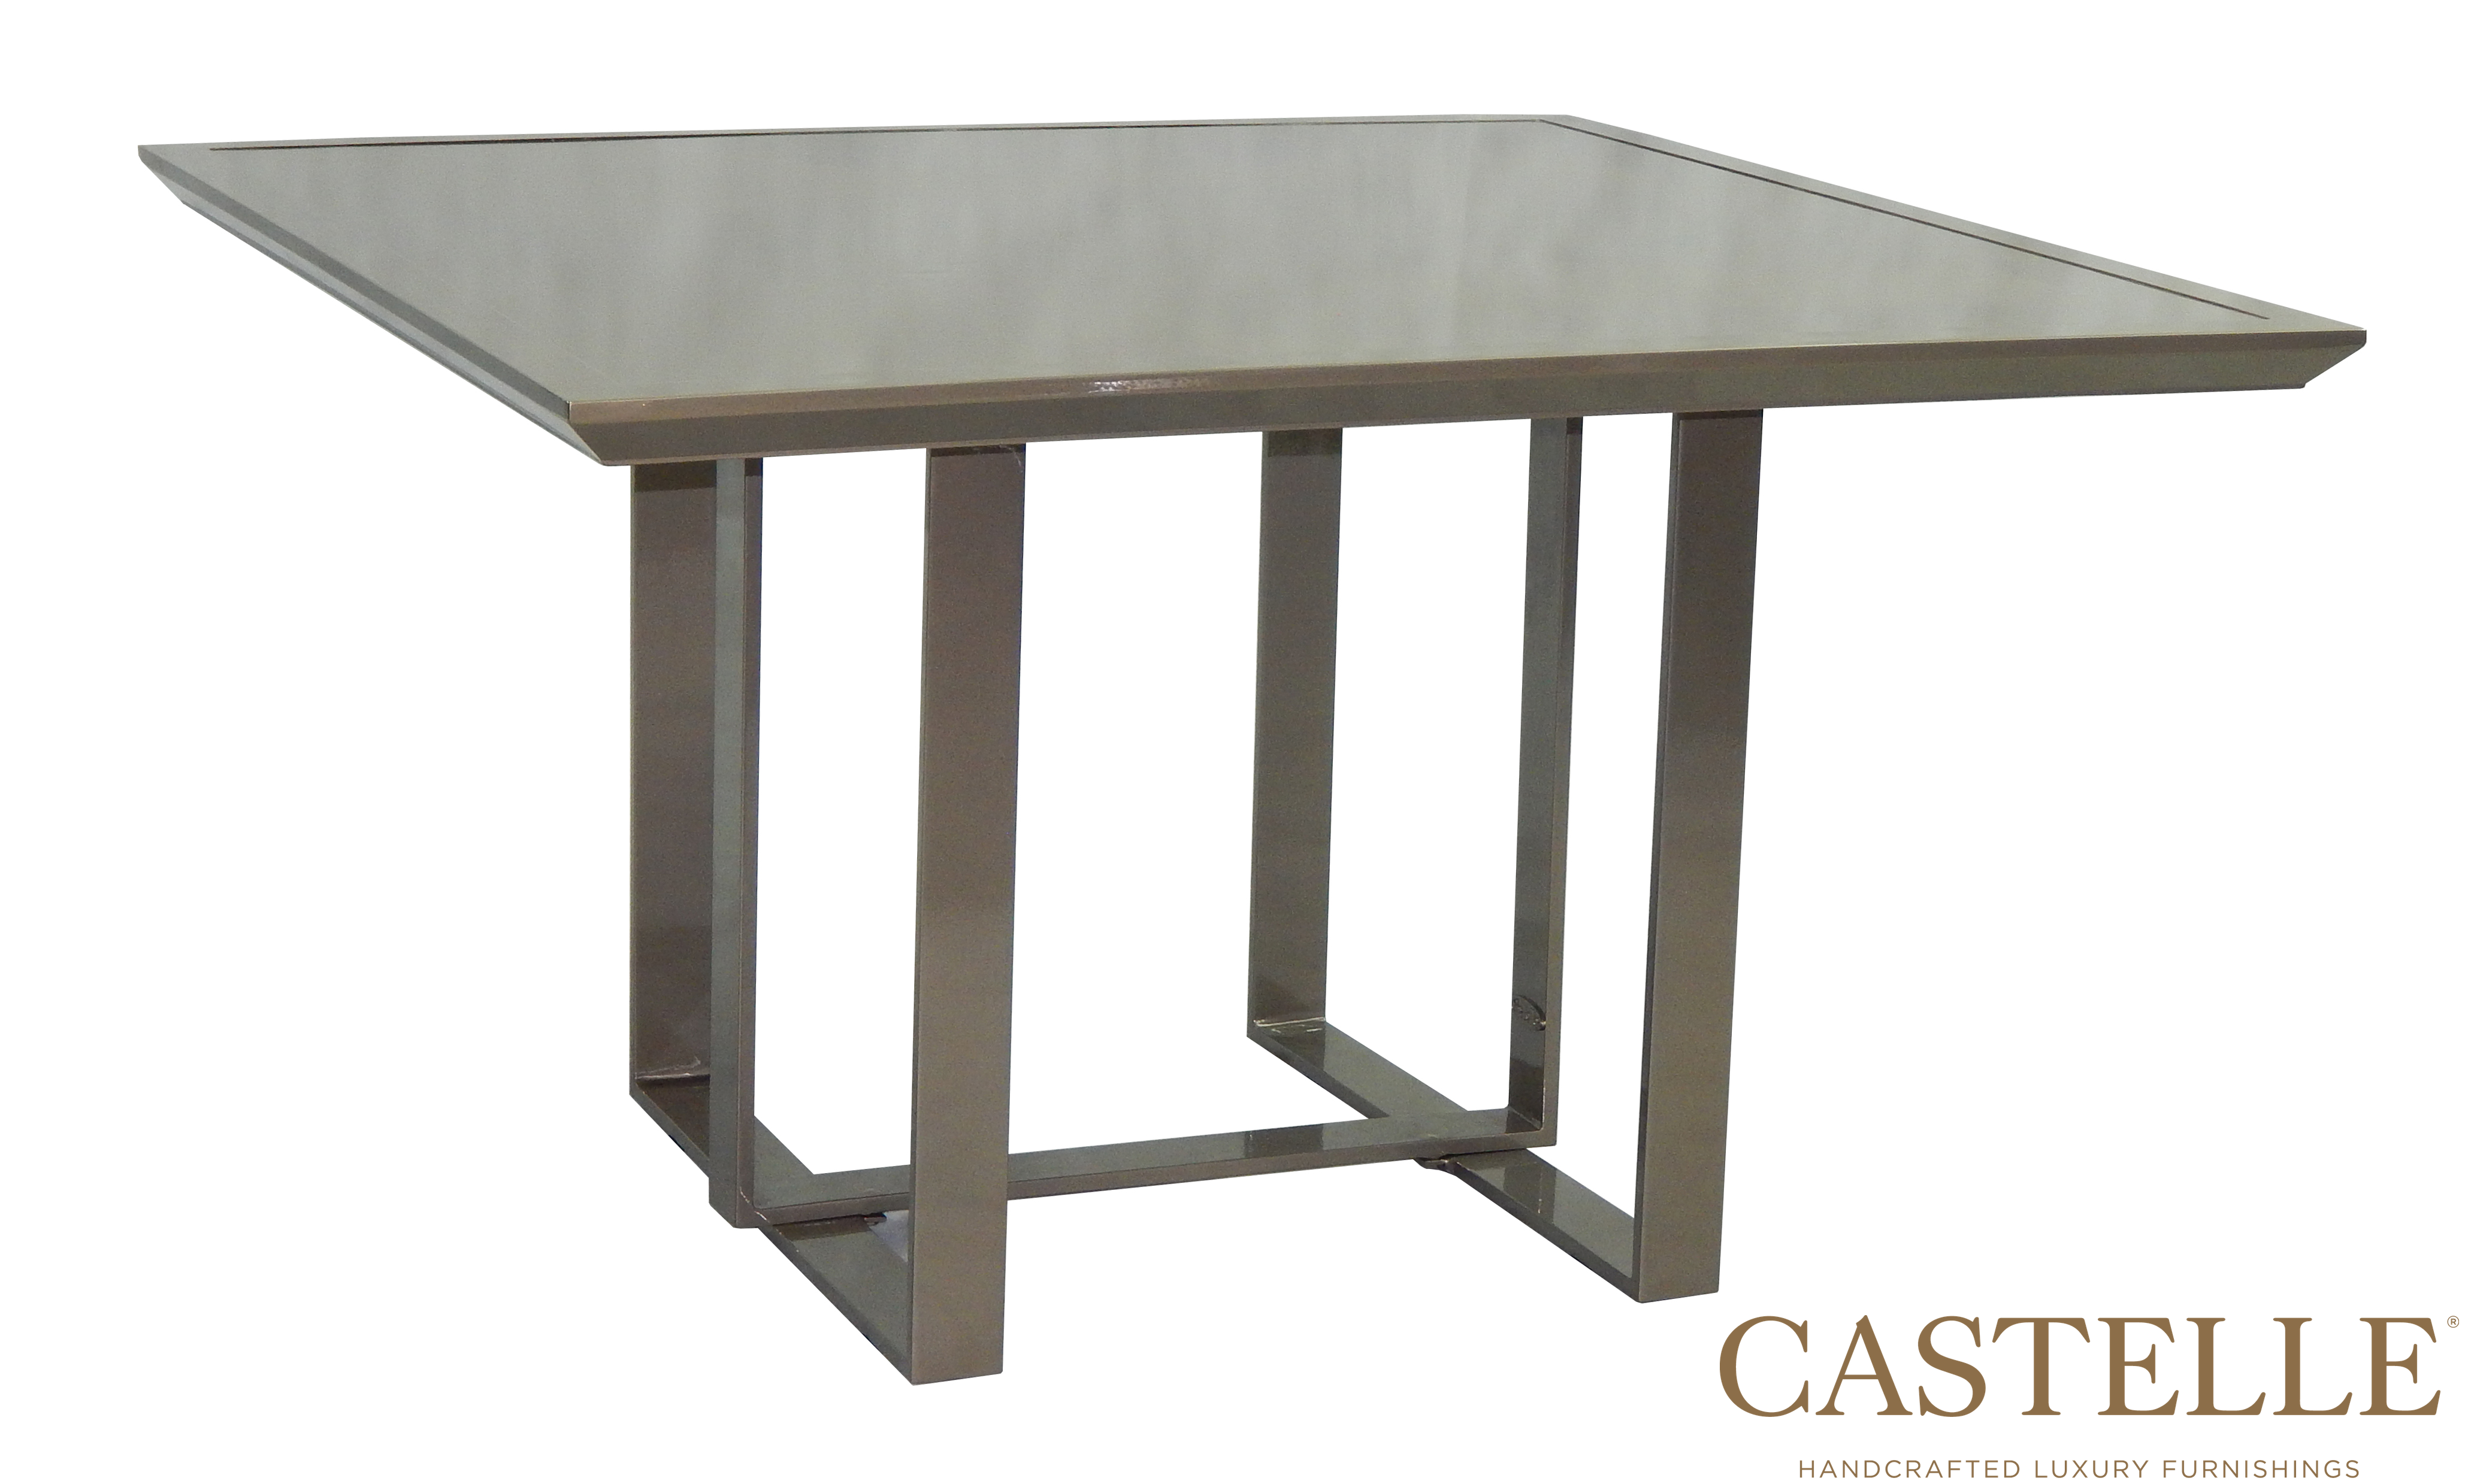 Moderna 44" Square Dining Table